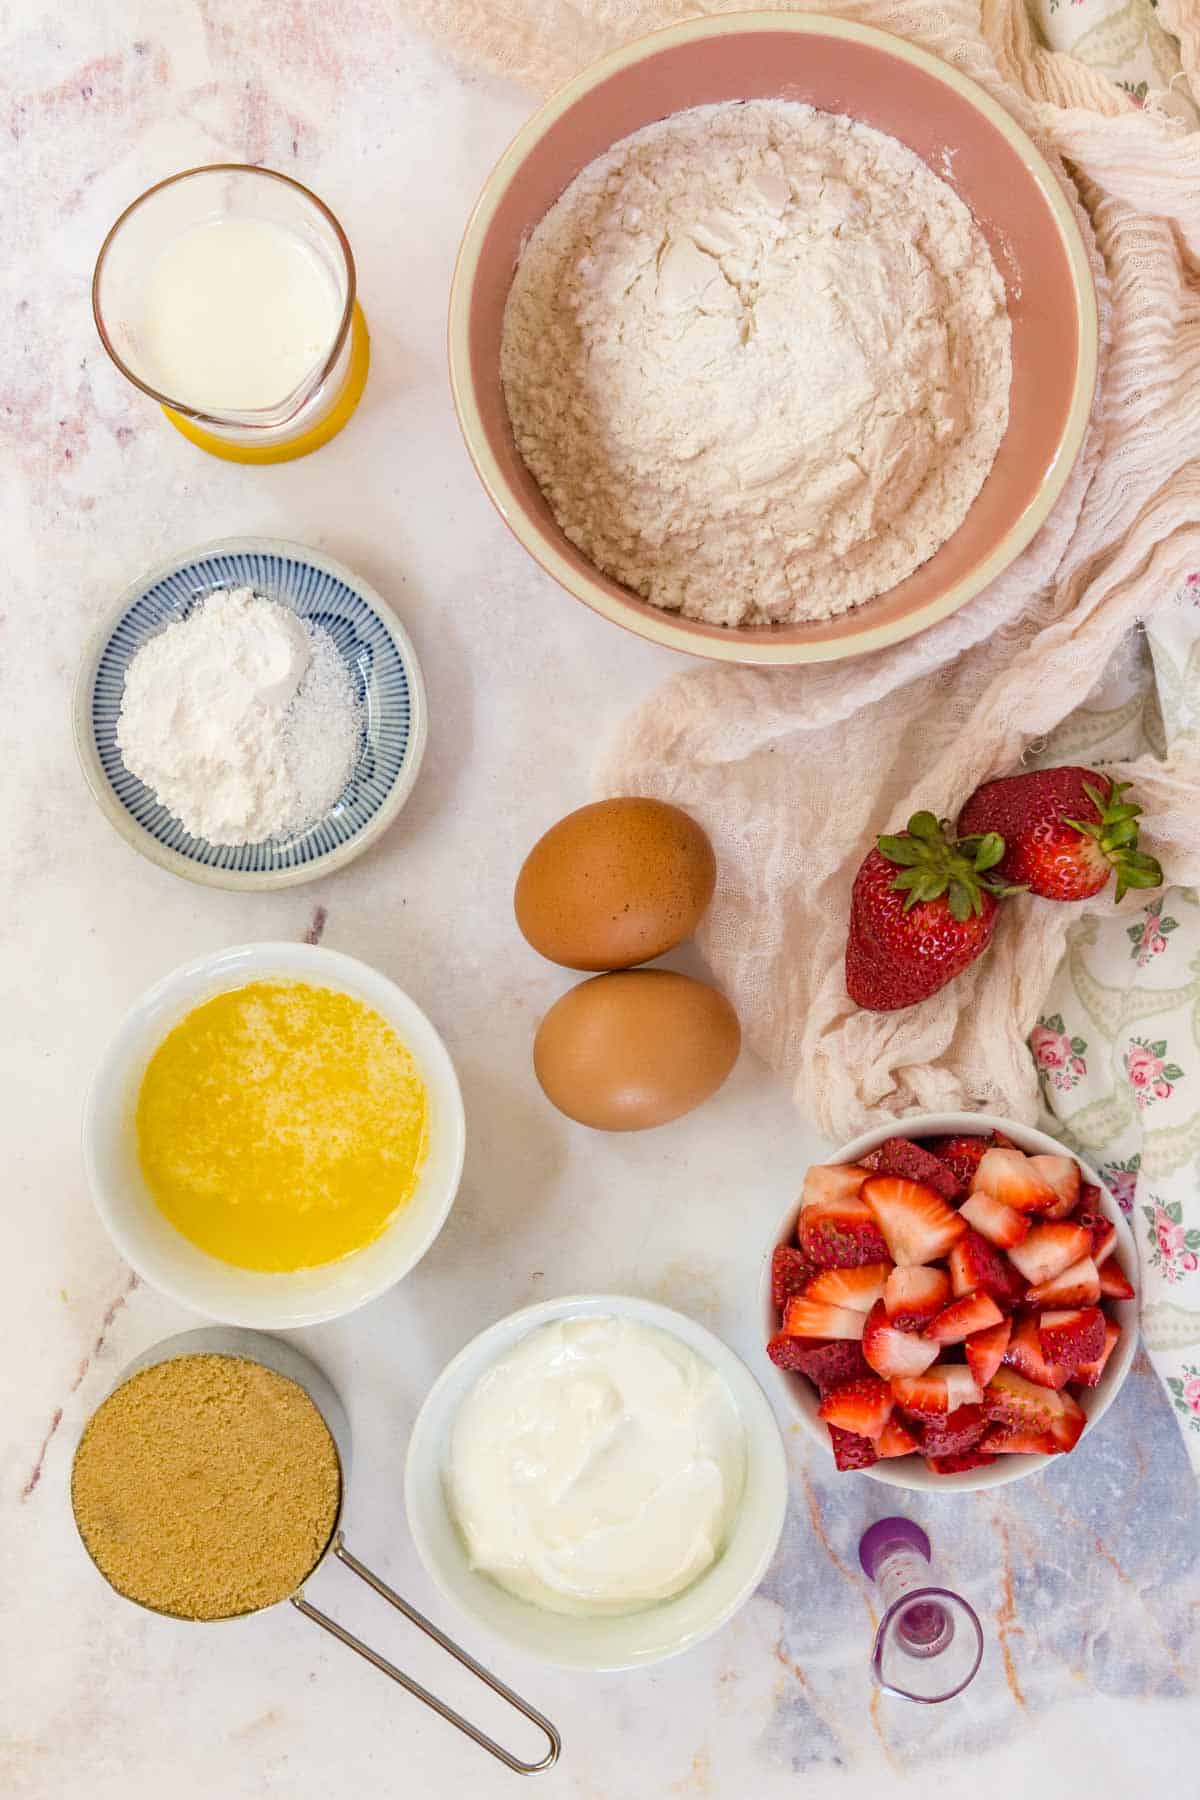 The ingredients for gluten free strawberry muffins.